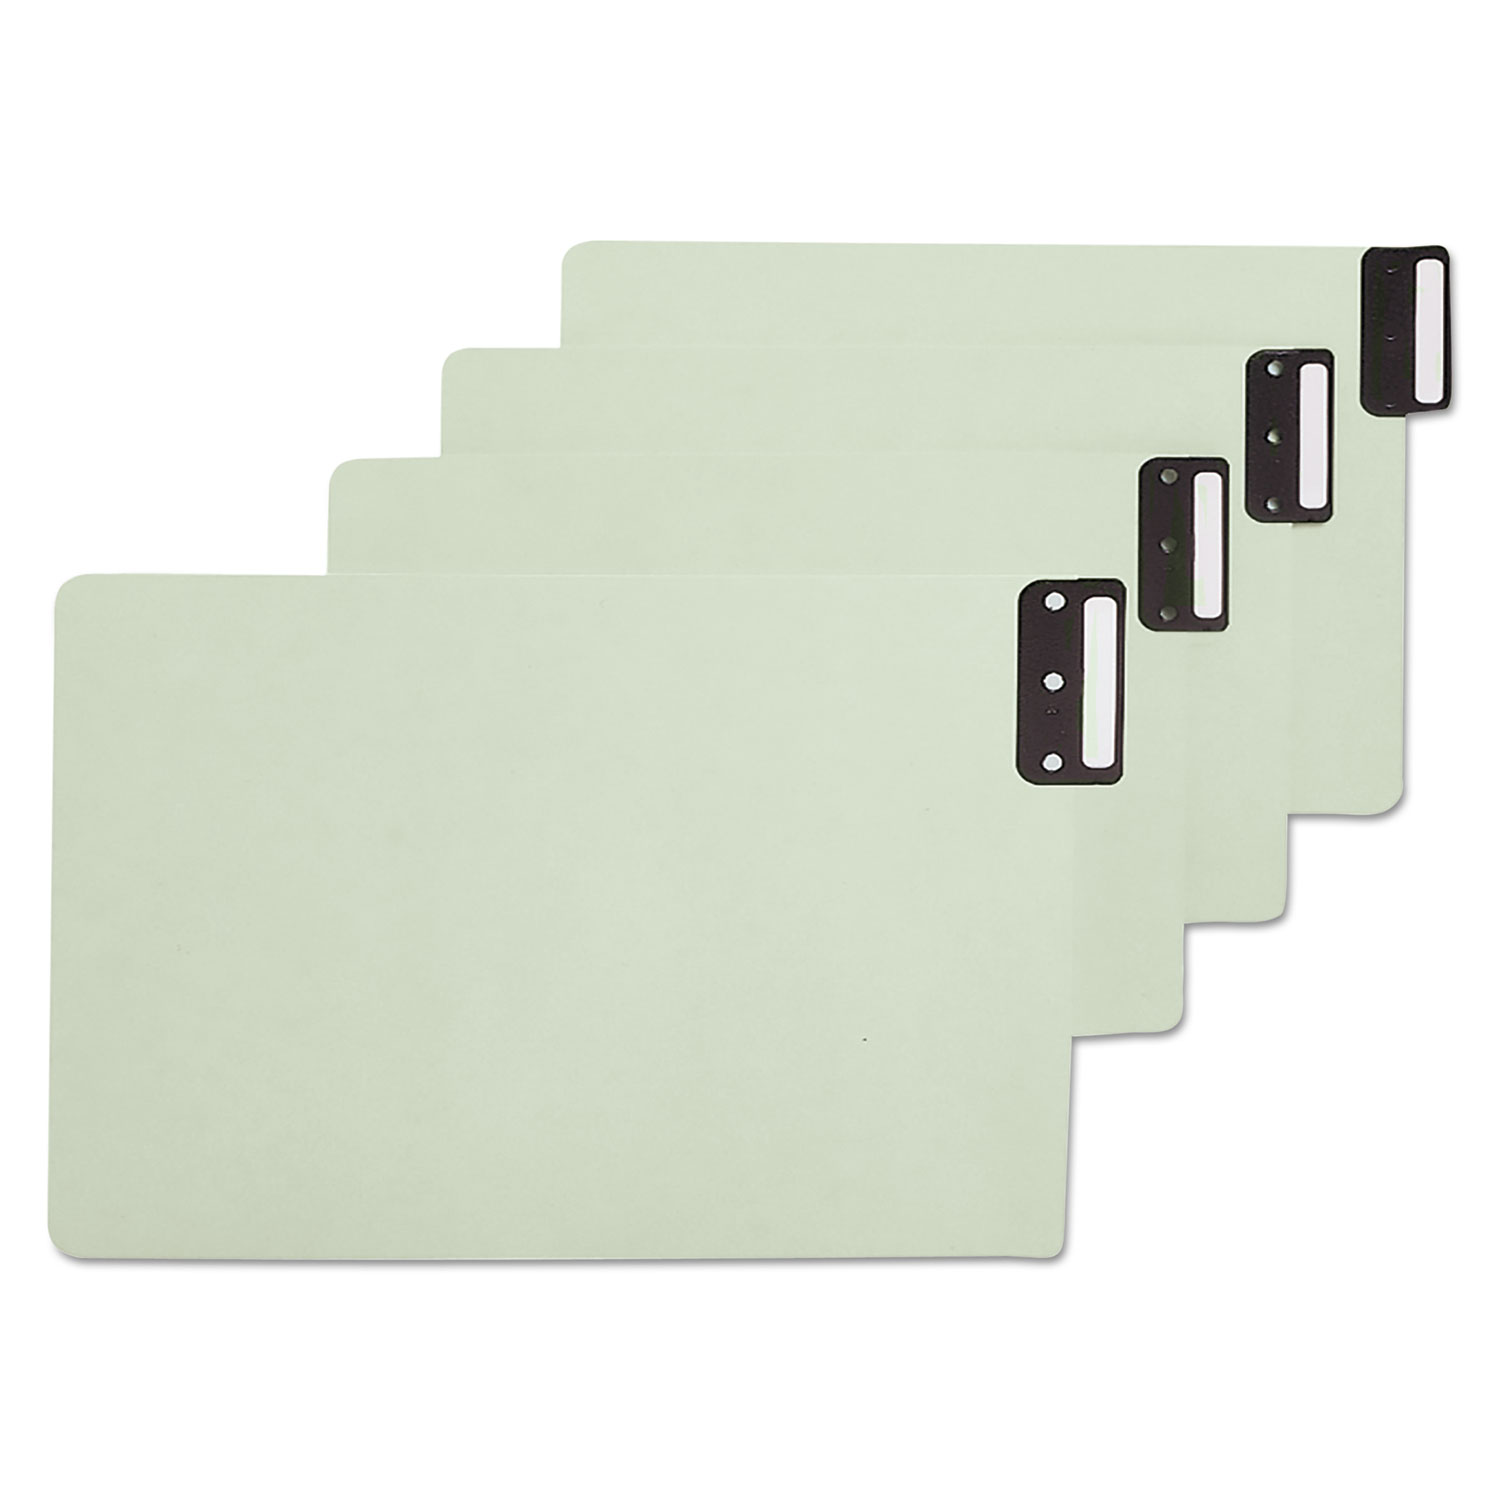  Smead 63235 100% Recycled End Tab Pressboard Guides with Metal Tabs, 1/3-Cut End Tab, Blank, 8.5 x 14, Green, 50/Box (SMD63235) 